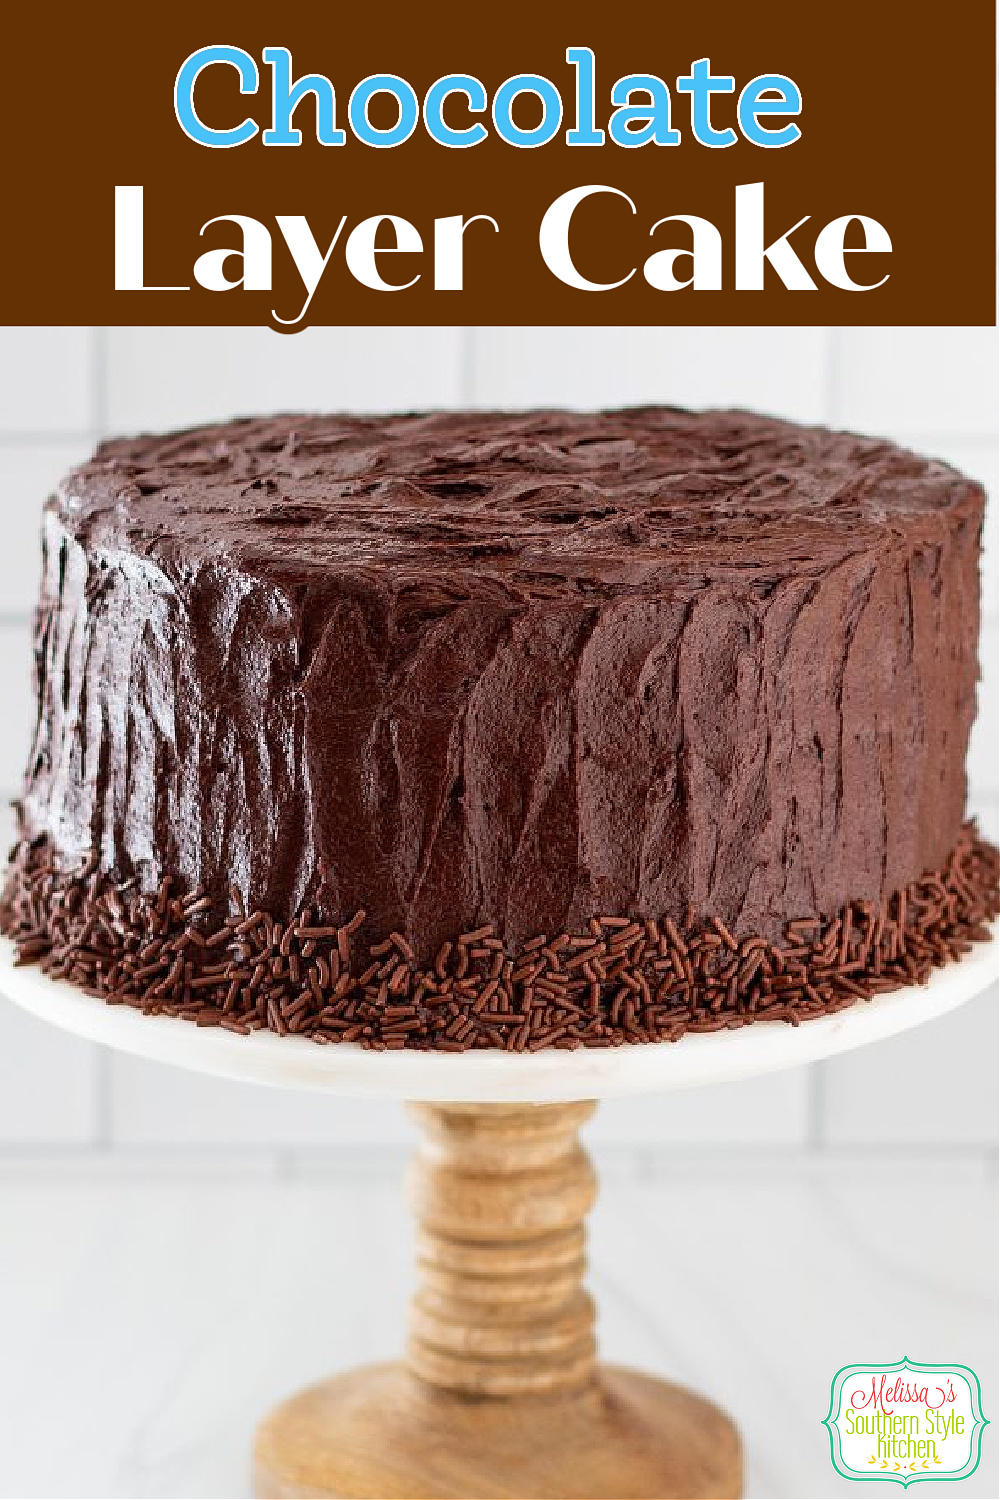 This made from scratch Best Chocolate Cake Recipe will turn any occasion into something special #chocolatecake #chocolatelayercake #chocolatefrostingrecipe #bestchocolatecake #cakerecipes #sourcreamfrosting #southerndesserts #desserts #dessertfoodrecipes #birthdaycake